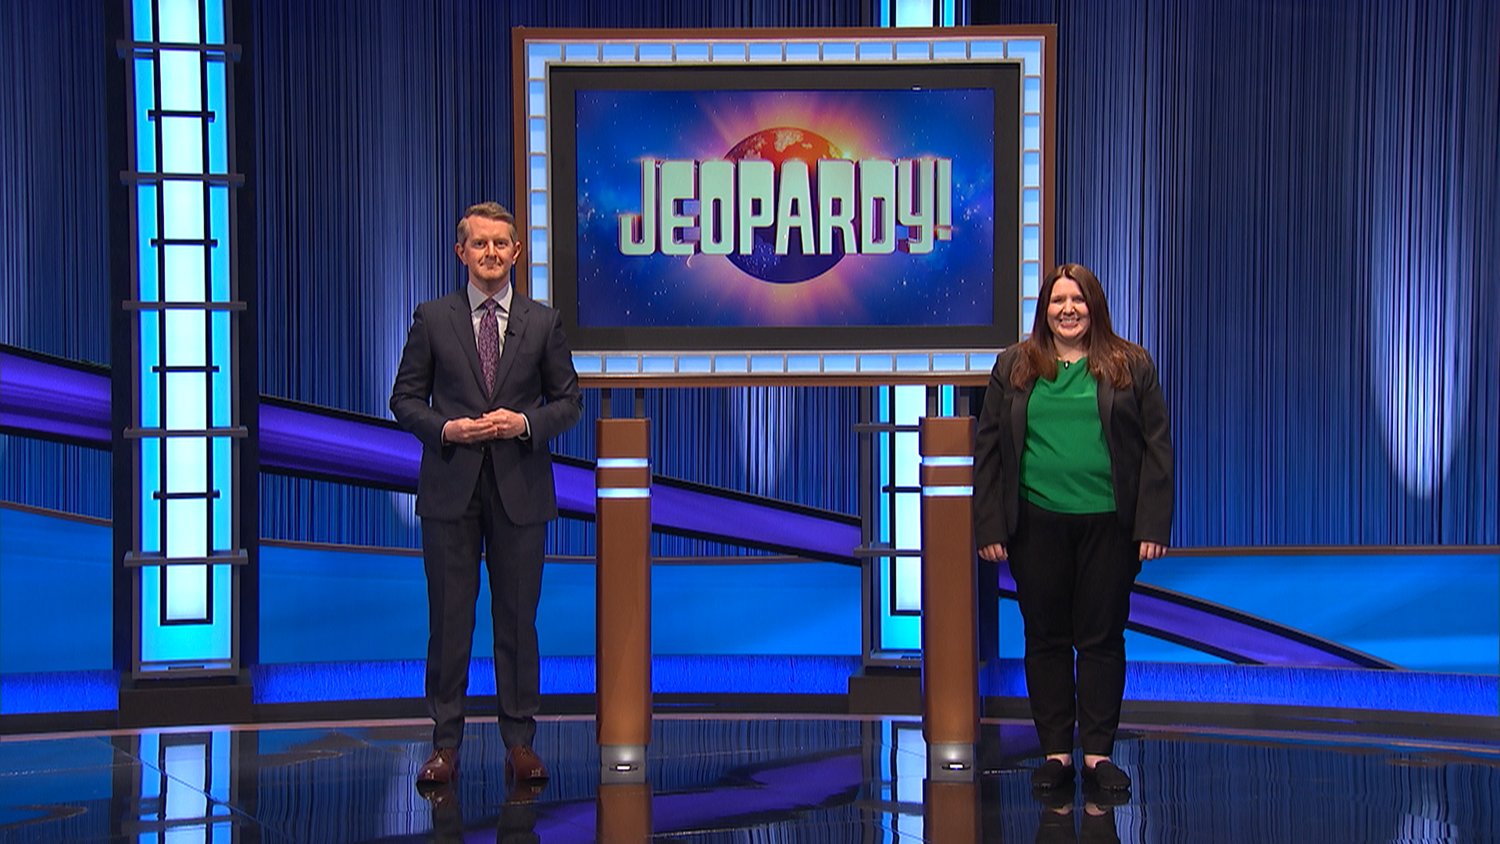 Camden native Dr. Brianne Barker on the set of Jeopardy! with co-host Ken Jennings.